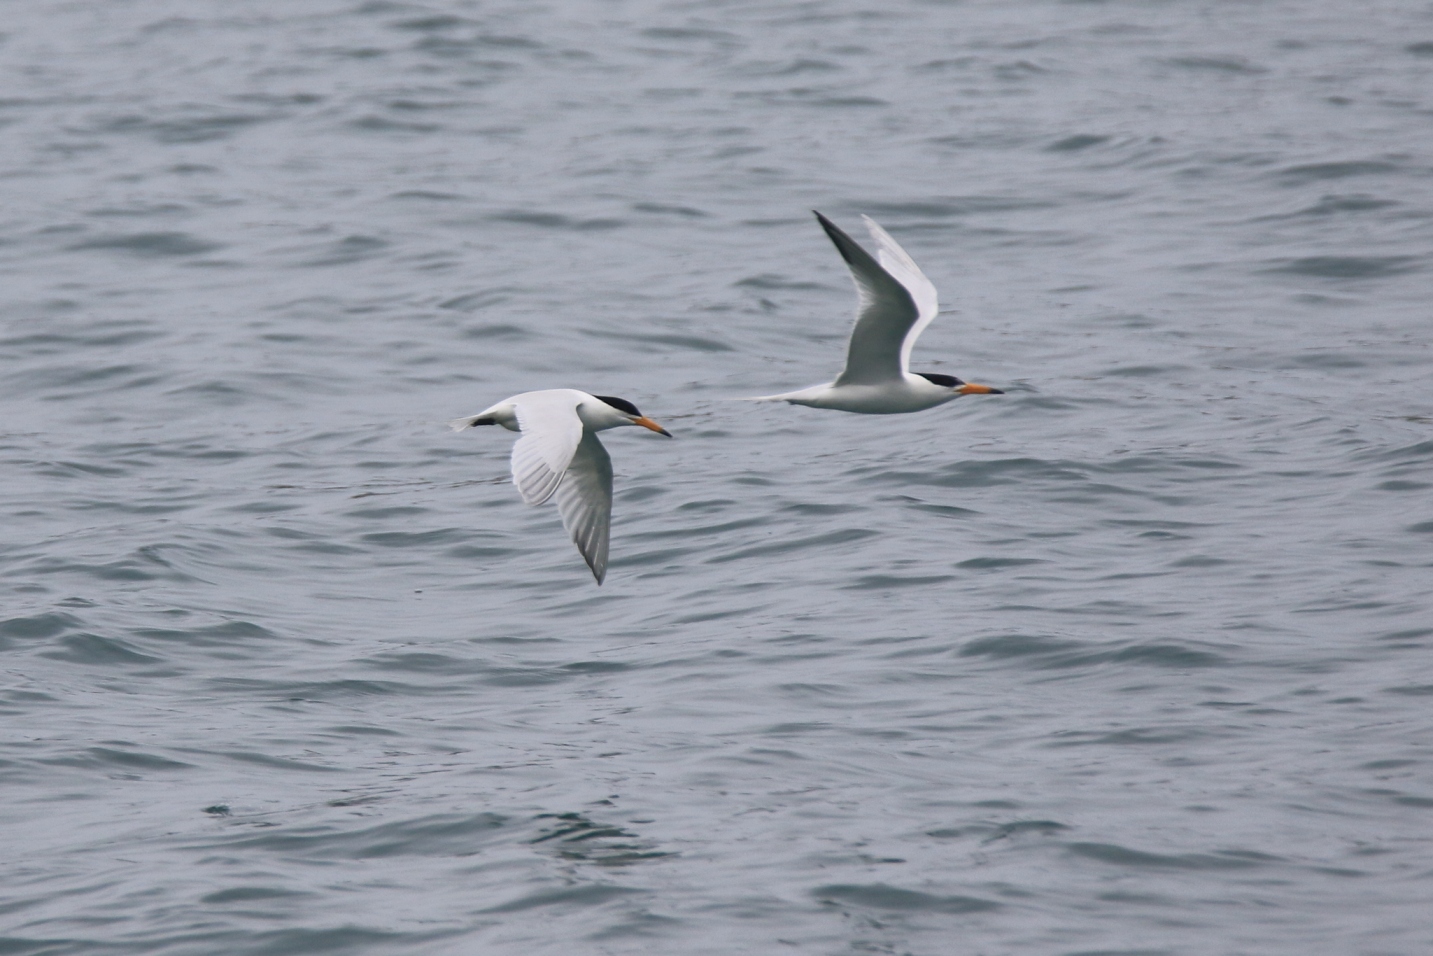 Chinese crested terns